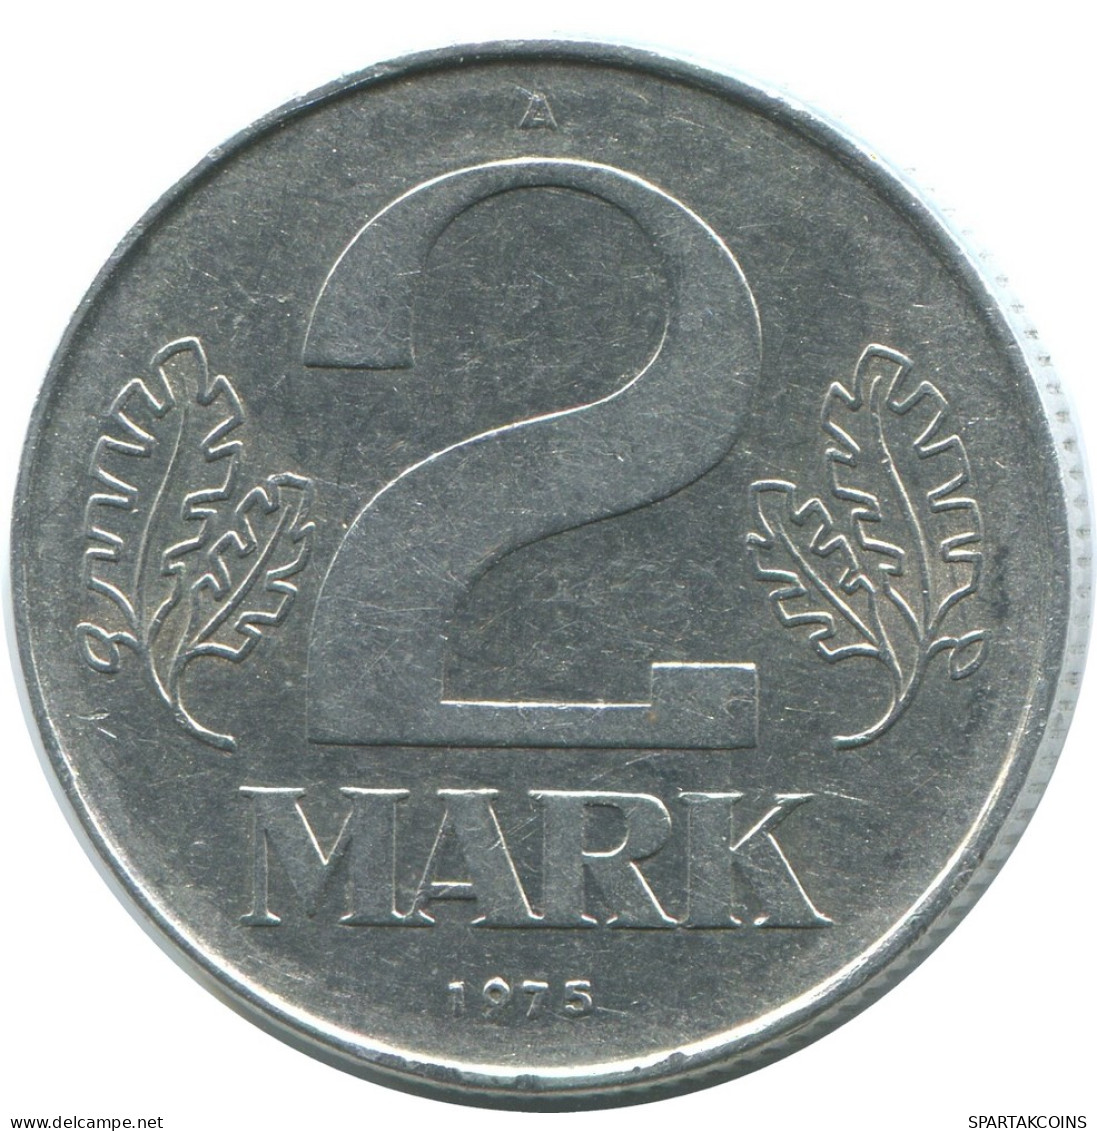 2 MARK 1975 A DDR EAST ALLEMAGNE Pièce GERMANY #AE130.F - 2 Mark